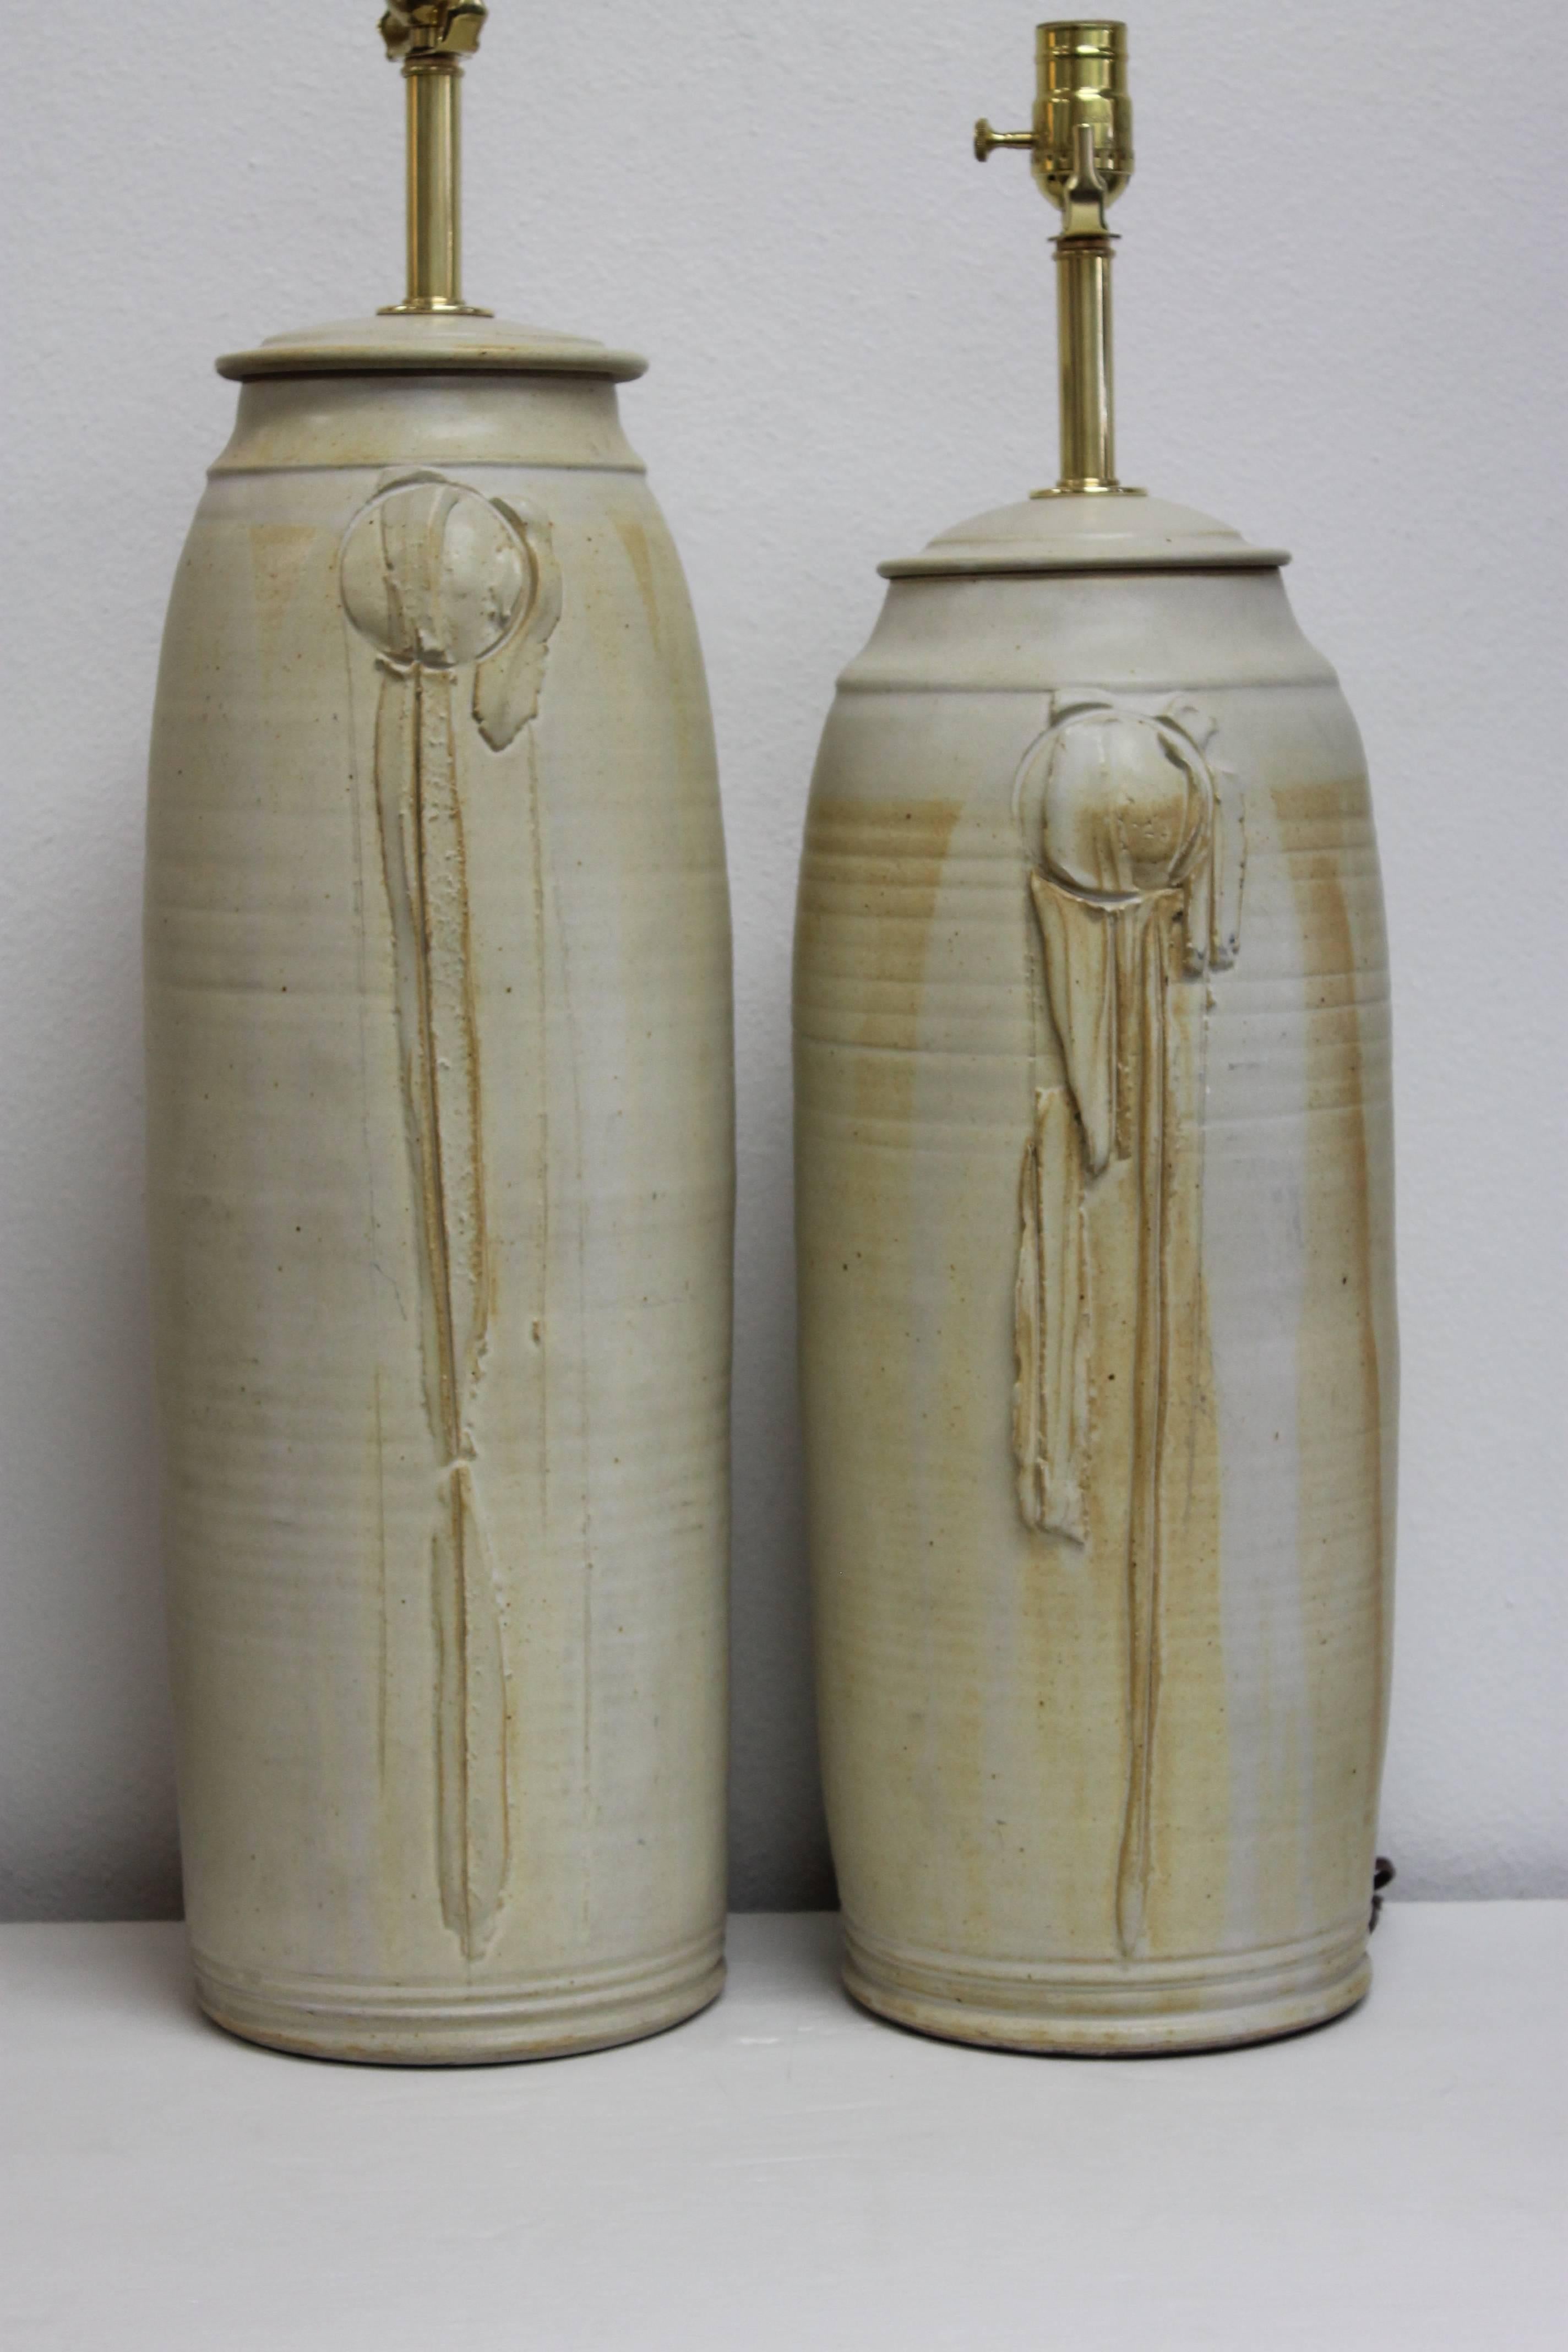 Pair of studio hand thrown lamps. The large ceramic portion is 23" high, 9" diameter and 26.5" from base to the bottom of socket. The smaller ceramic portion is 20.5" high, 9" diameter and 24" high from base to the